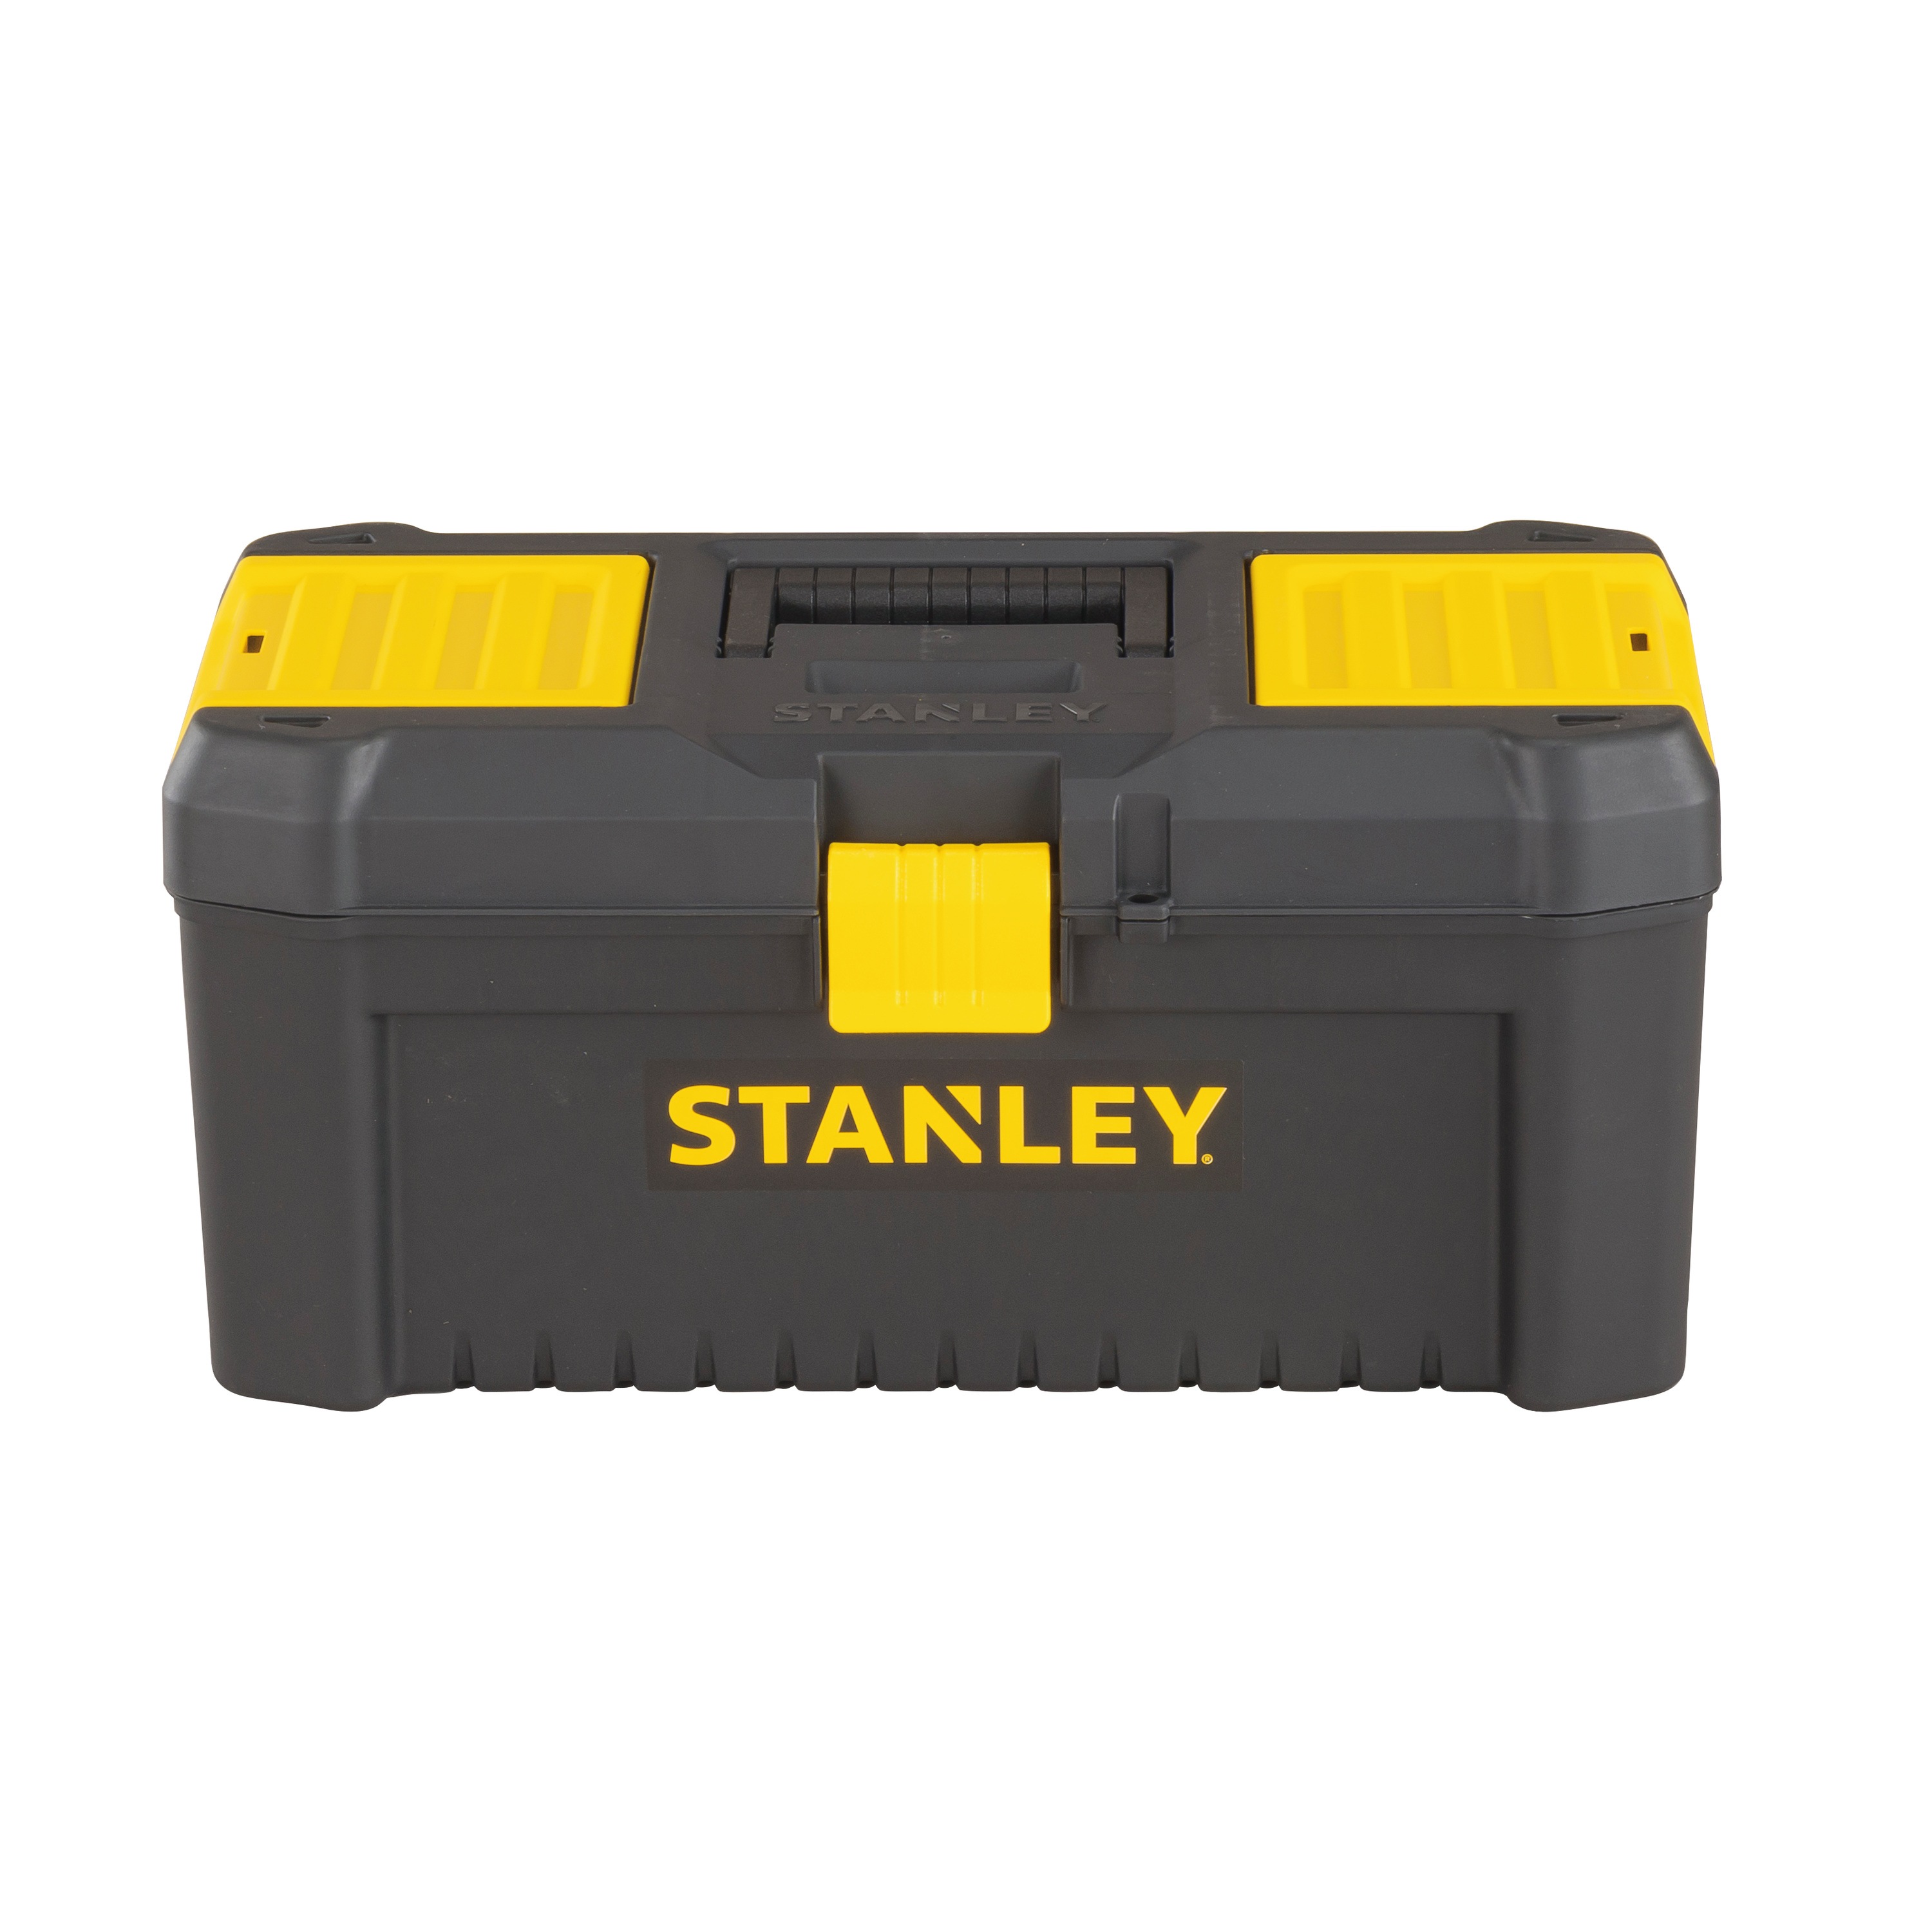 16 Black/Yellow Stanley Tools and Consumer Storage STST16331 Stanley Essential Toolbox 